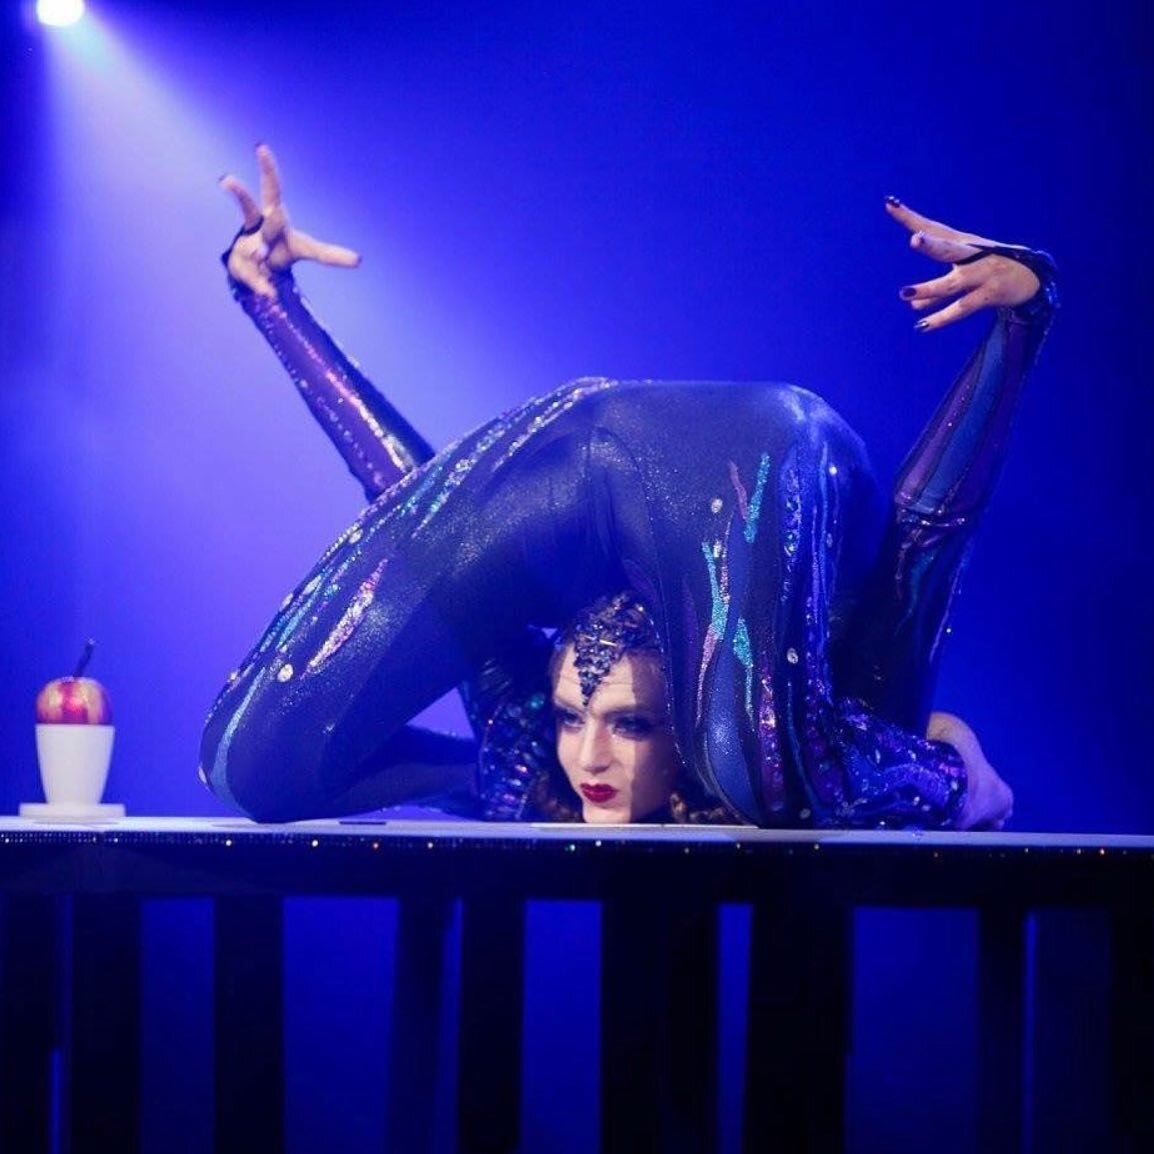 Need some &lsquo;OMG&rsquo; Entertainment &mdash; look no further, our contortionist is the real McCoy 😉
.
.
Enquire today! 
.
#avionaerialentertainment #avionaerialarts #omg #contortionist #contortion #sydneycircus #sydneyentertainment #entertainme